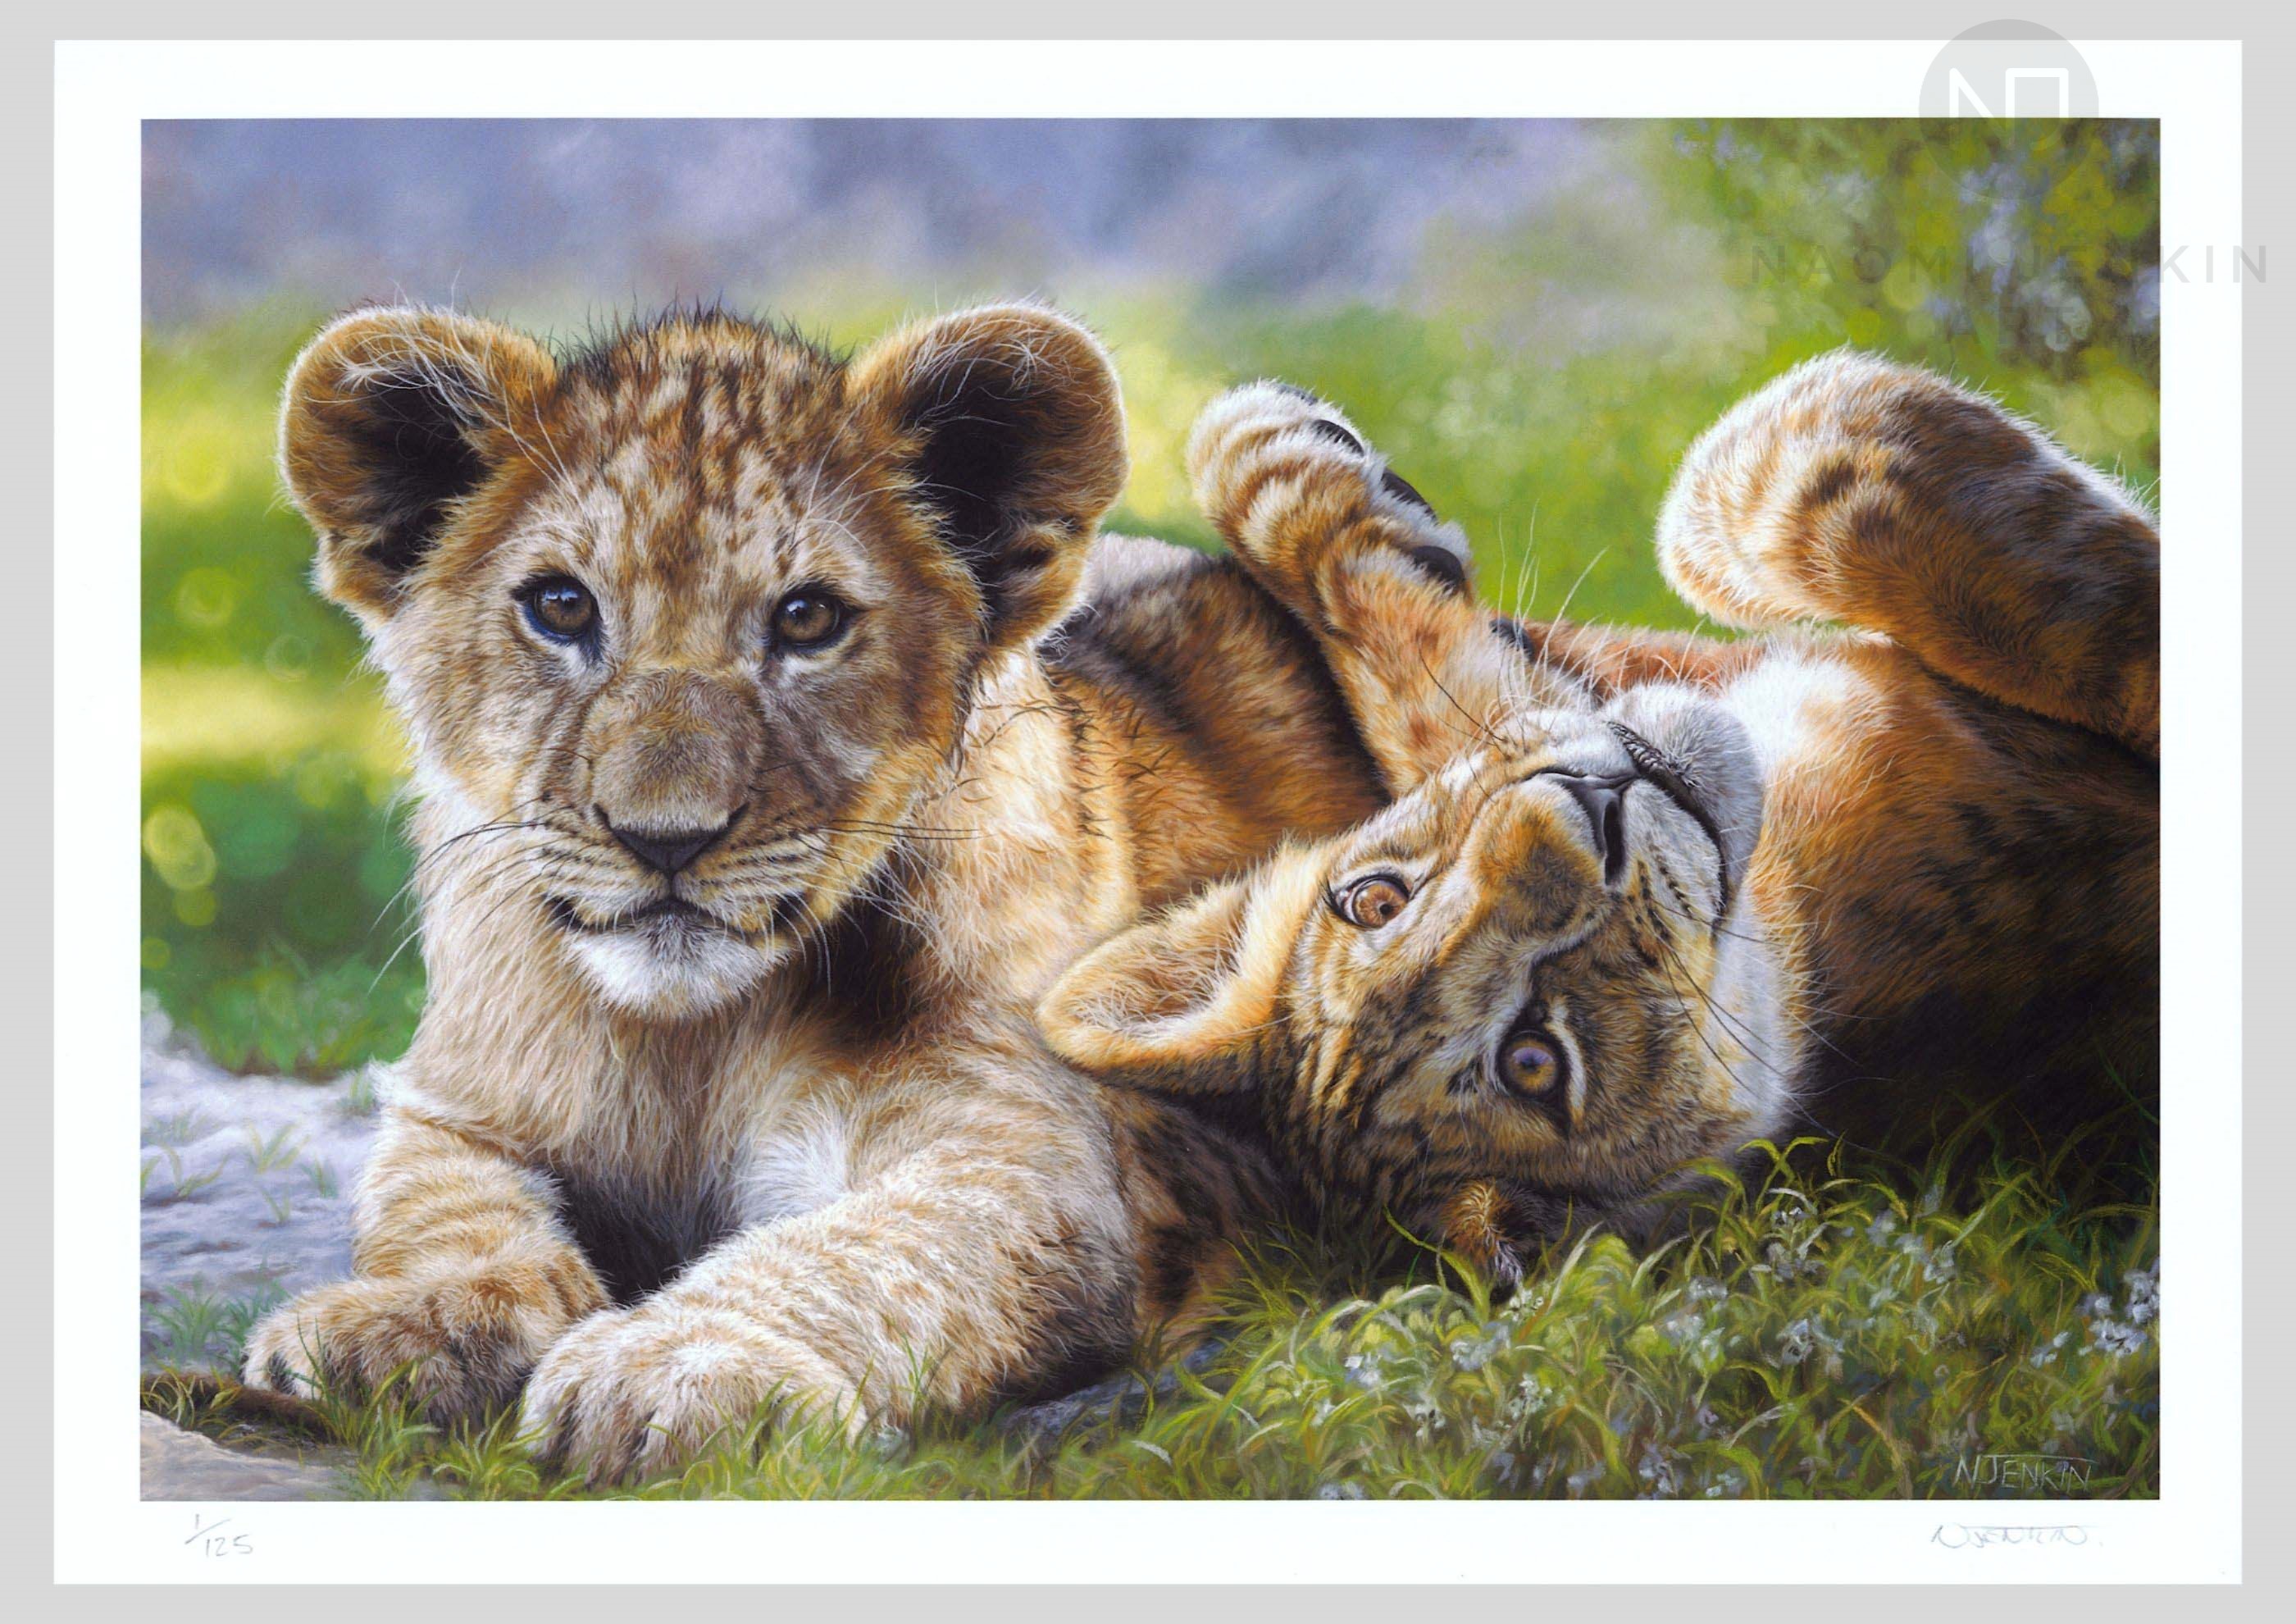 Limited edition fine art print of lion painting by wildlife artist Naomi Jenkin.